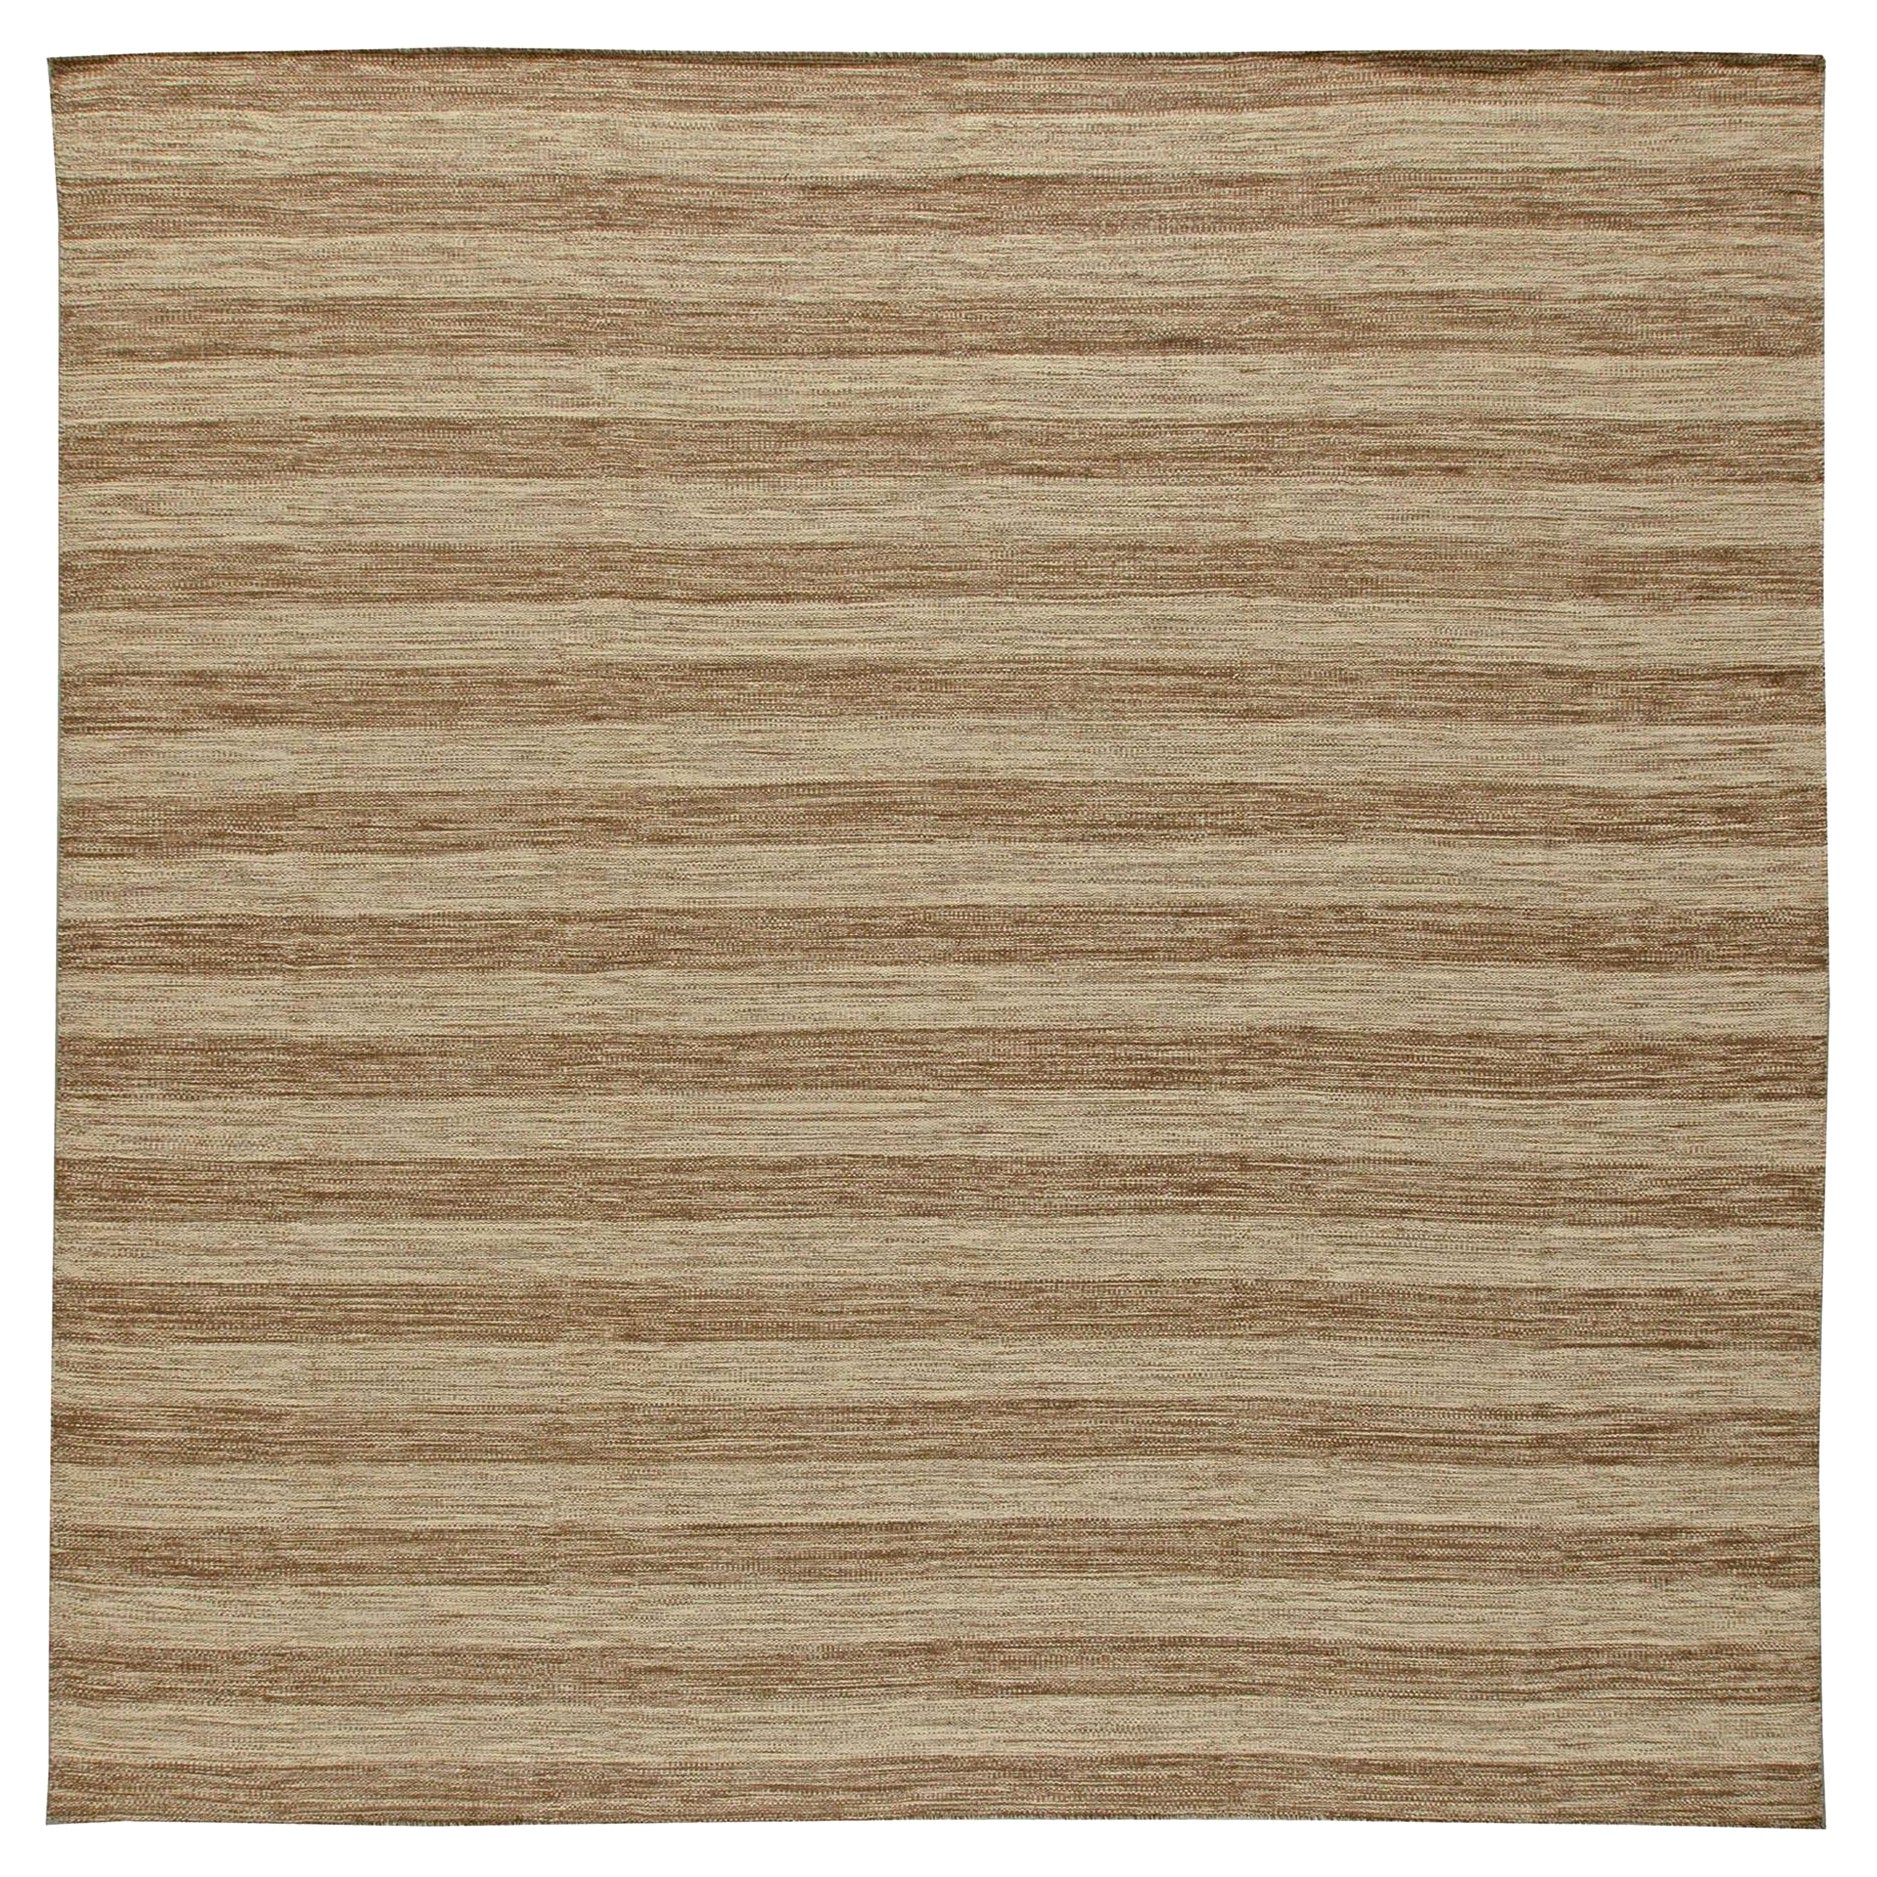 Contemporary Striped Brown and Beige Flat-Weave Wool Rug by Doris Leslie Blau For Sale